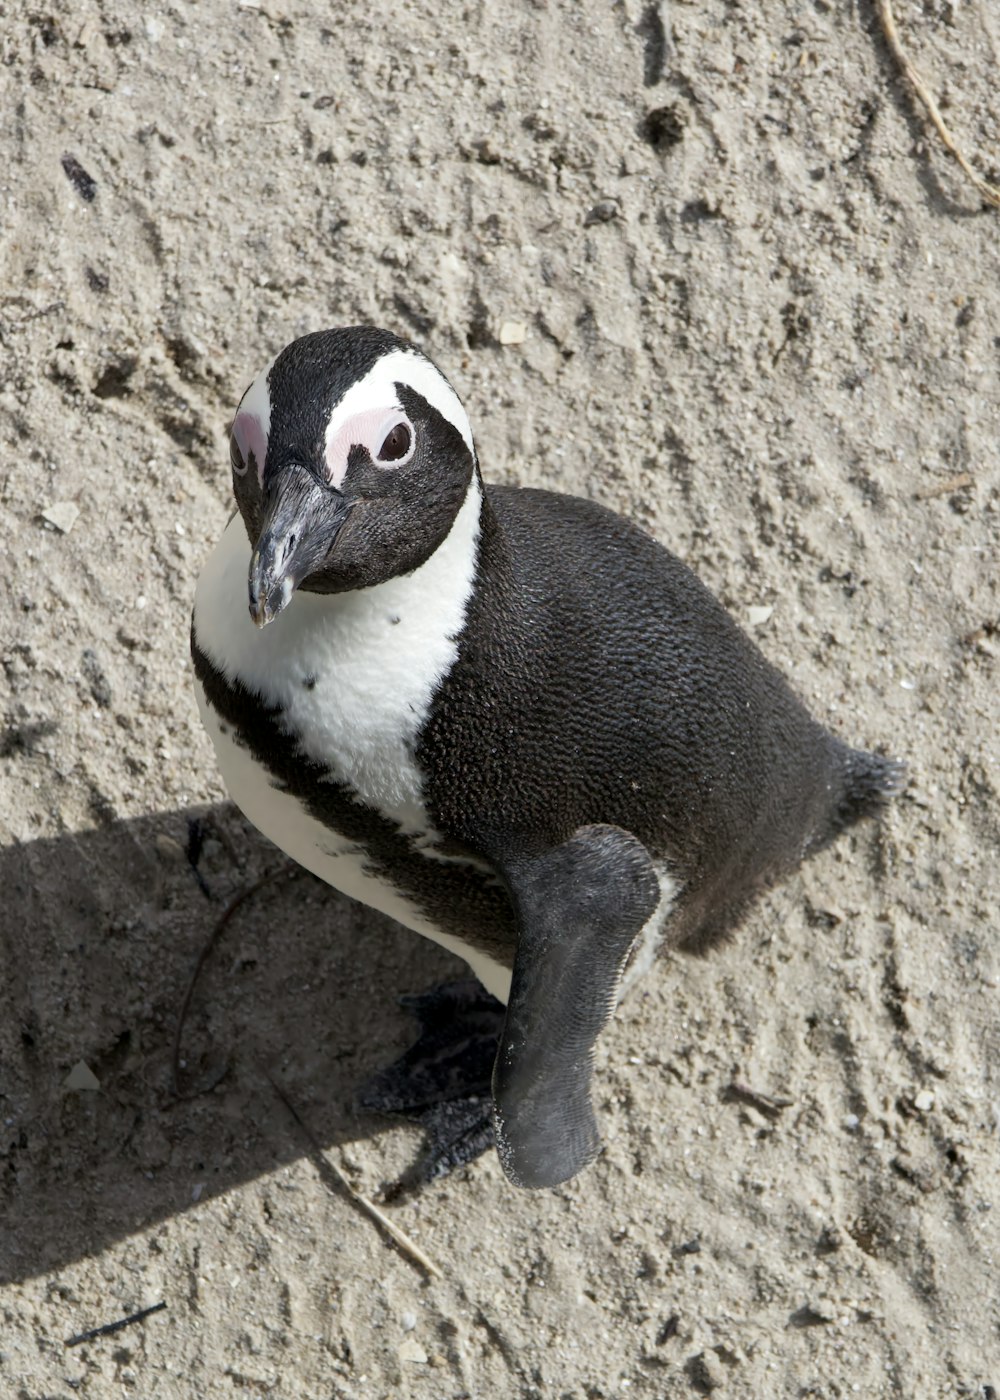 a small penguin is sitting on the ground